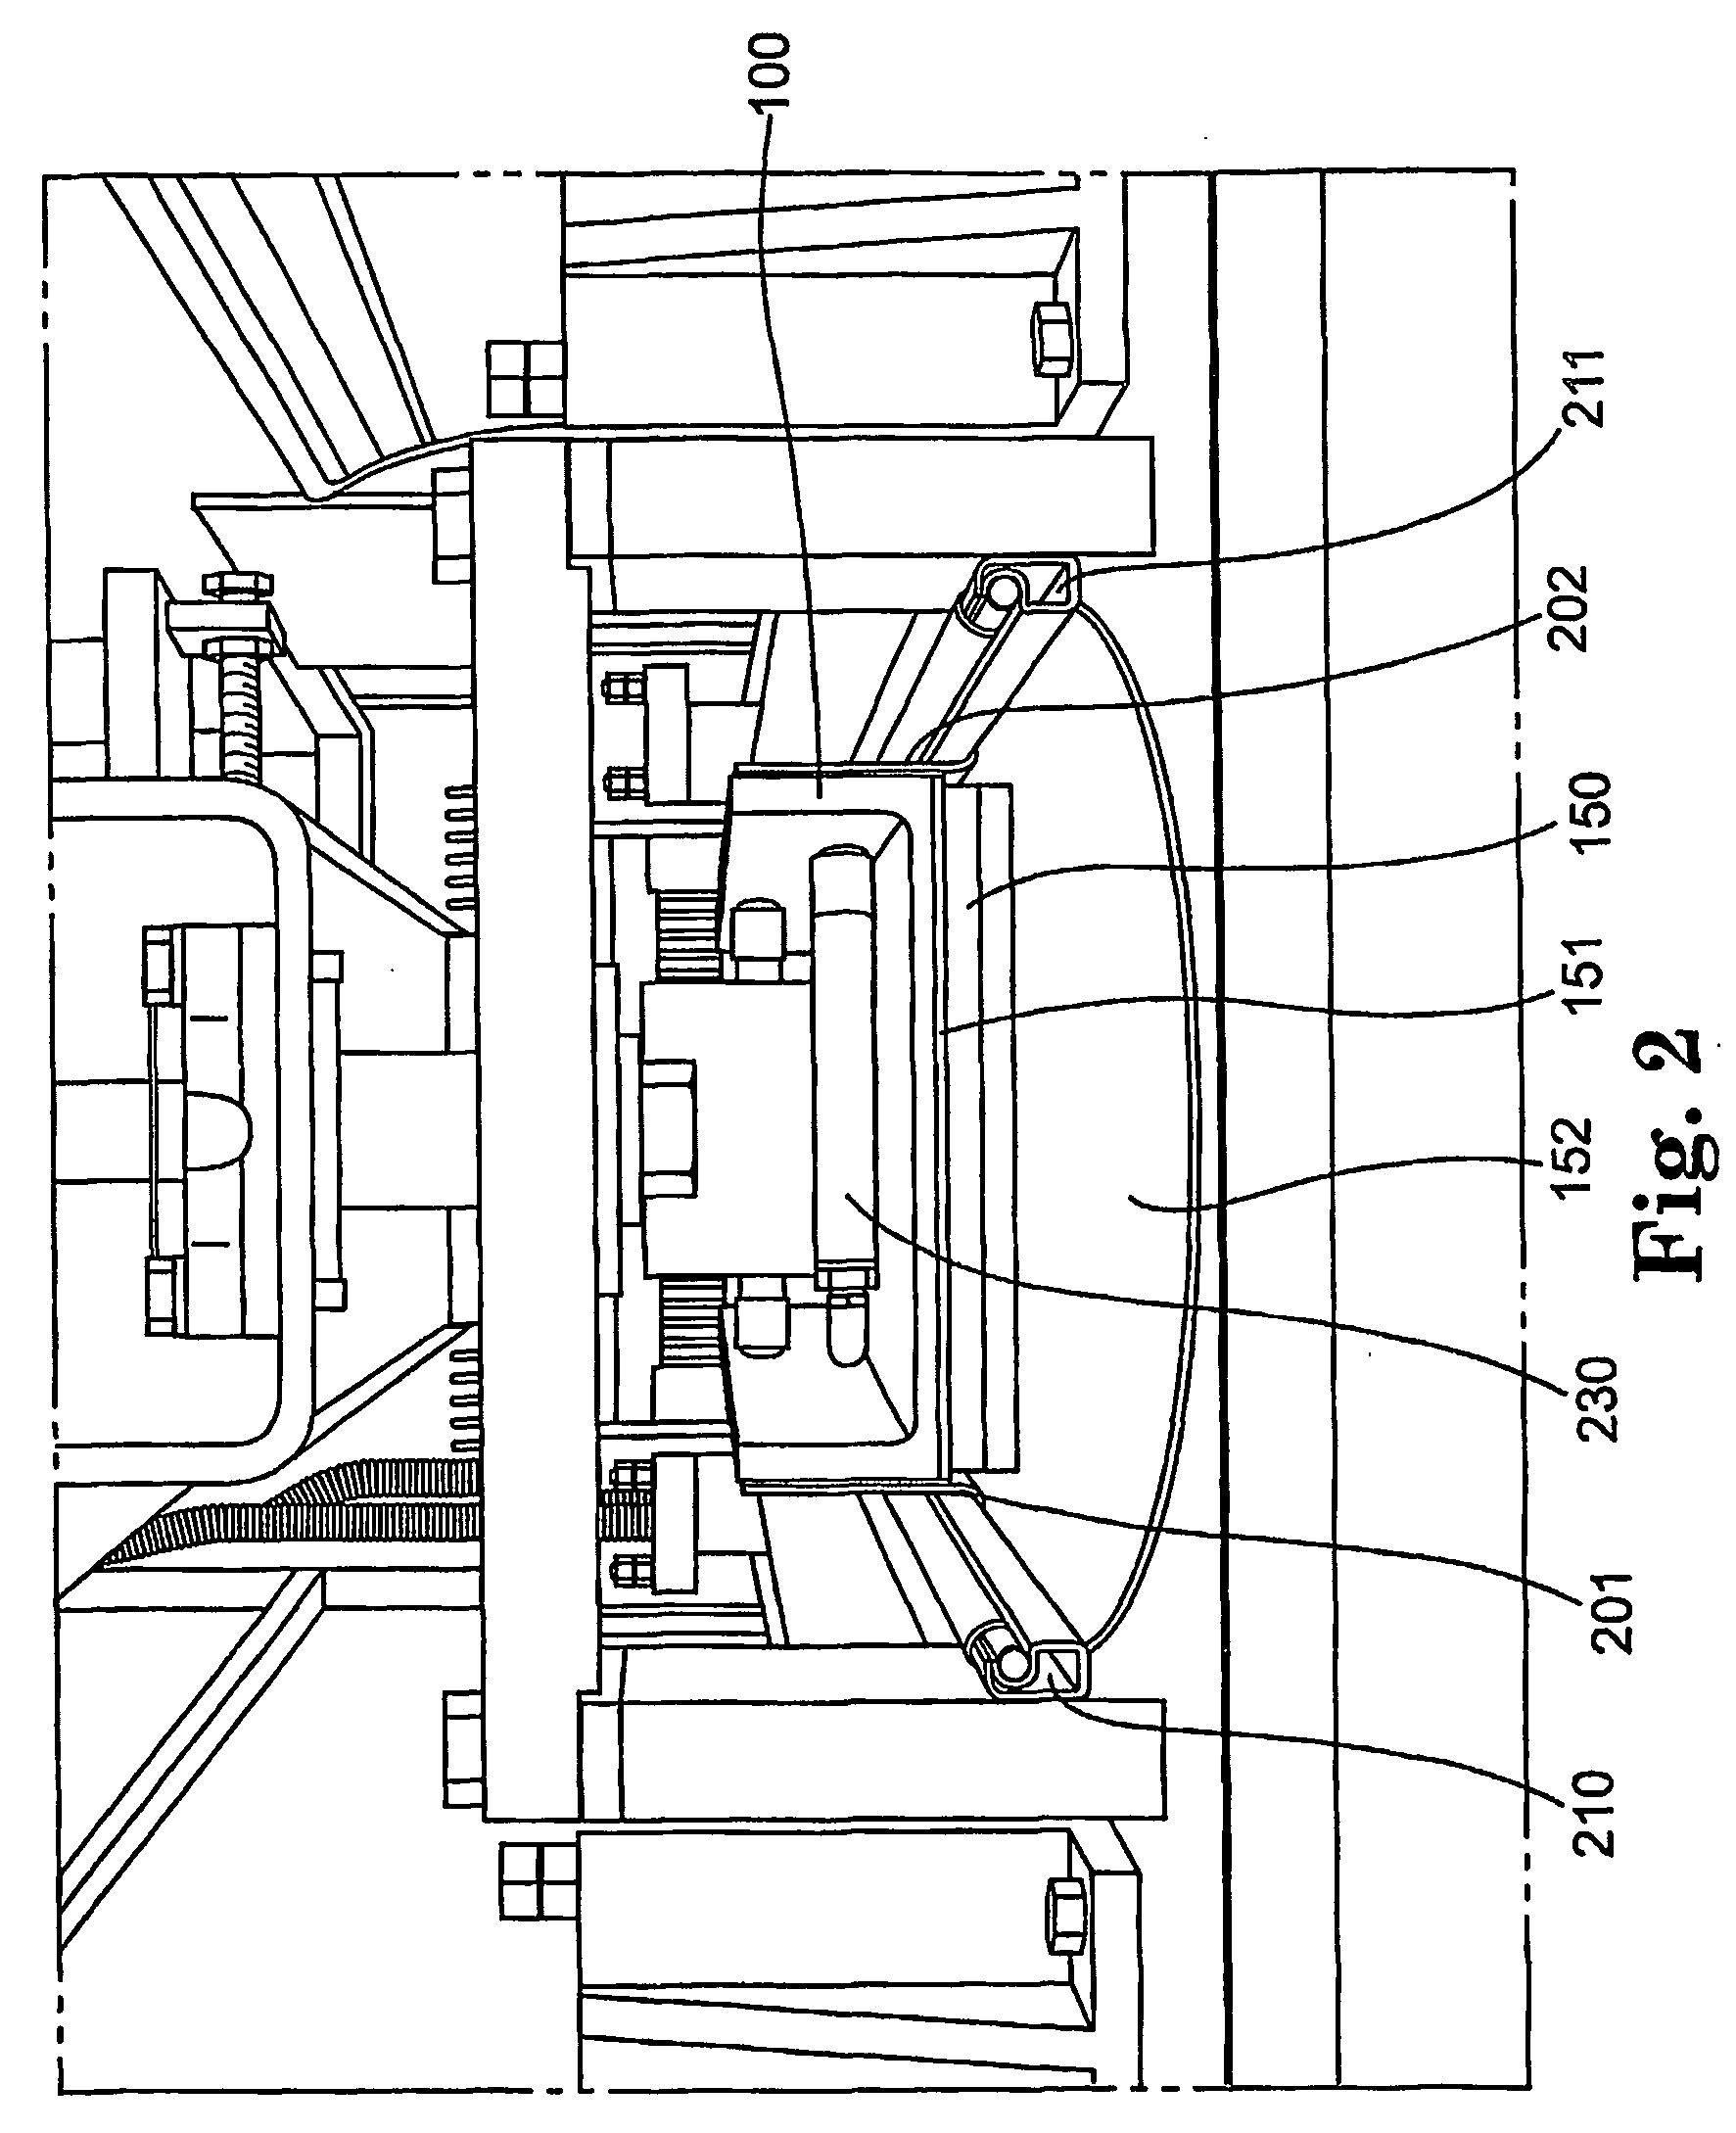 System for replacement of sheet abrasive